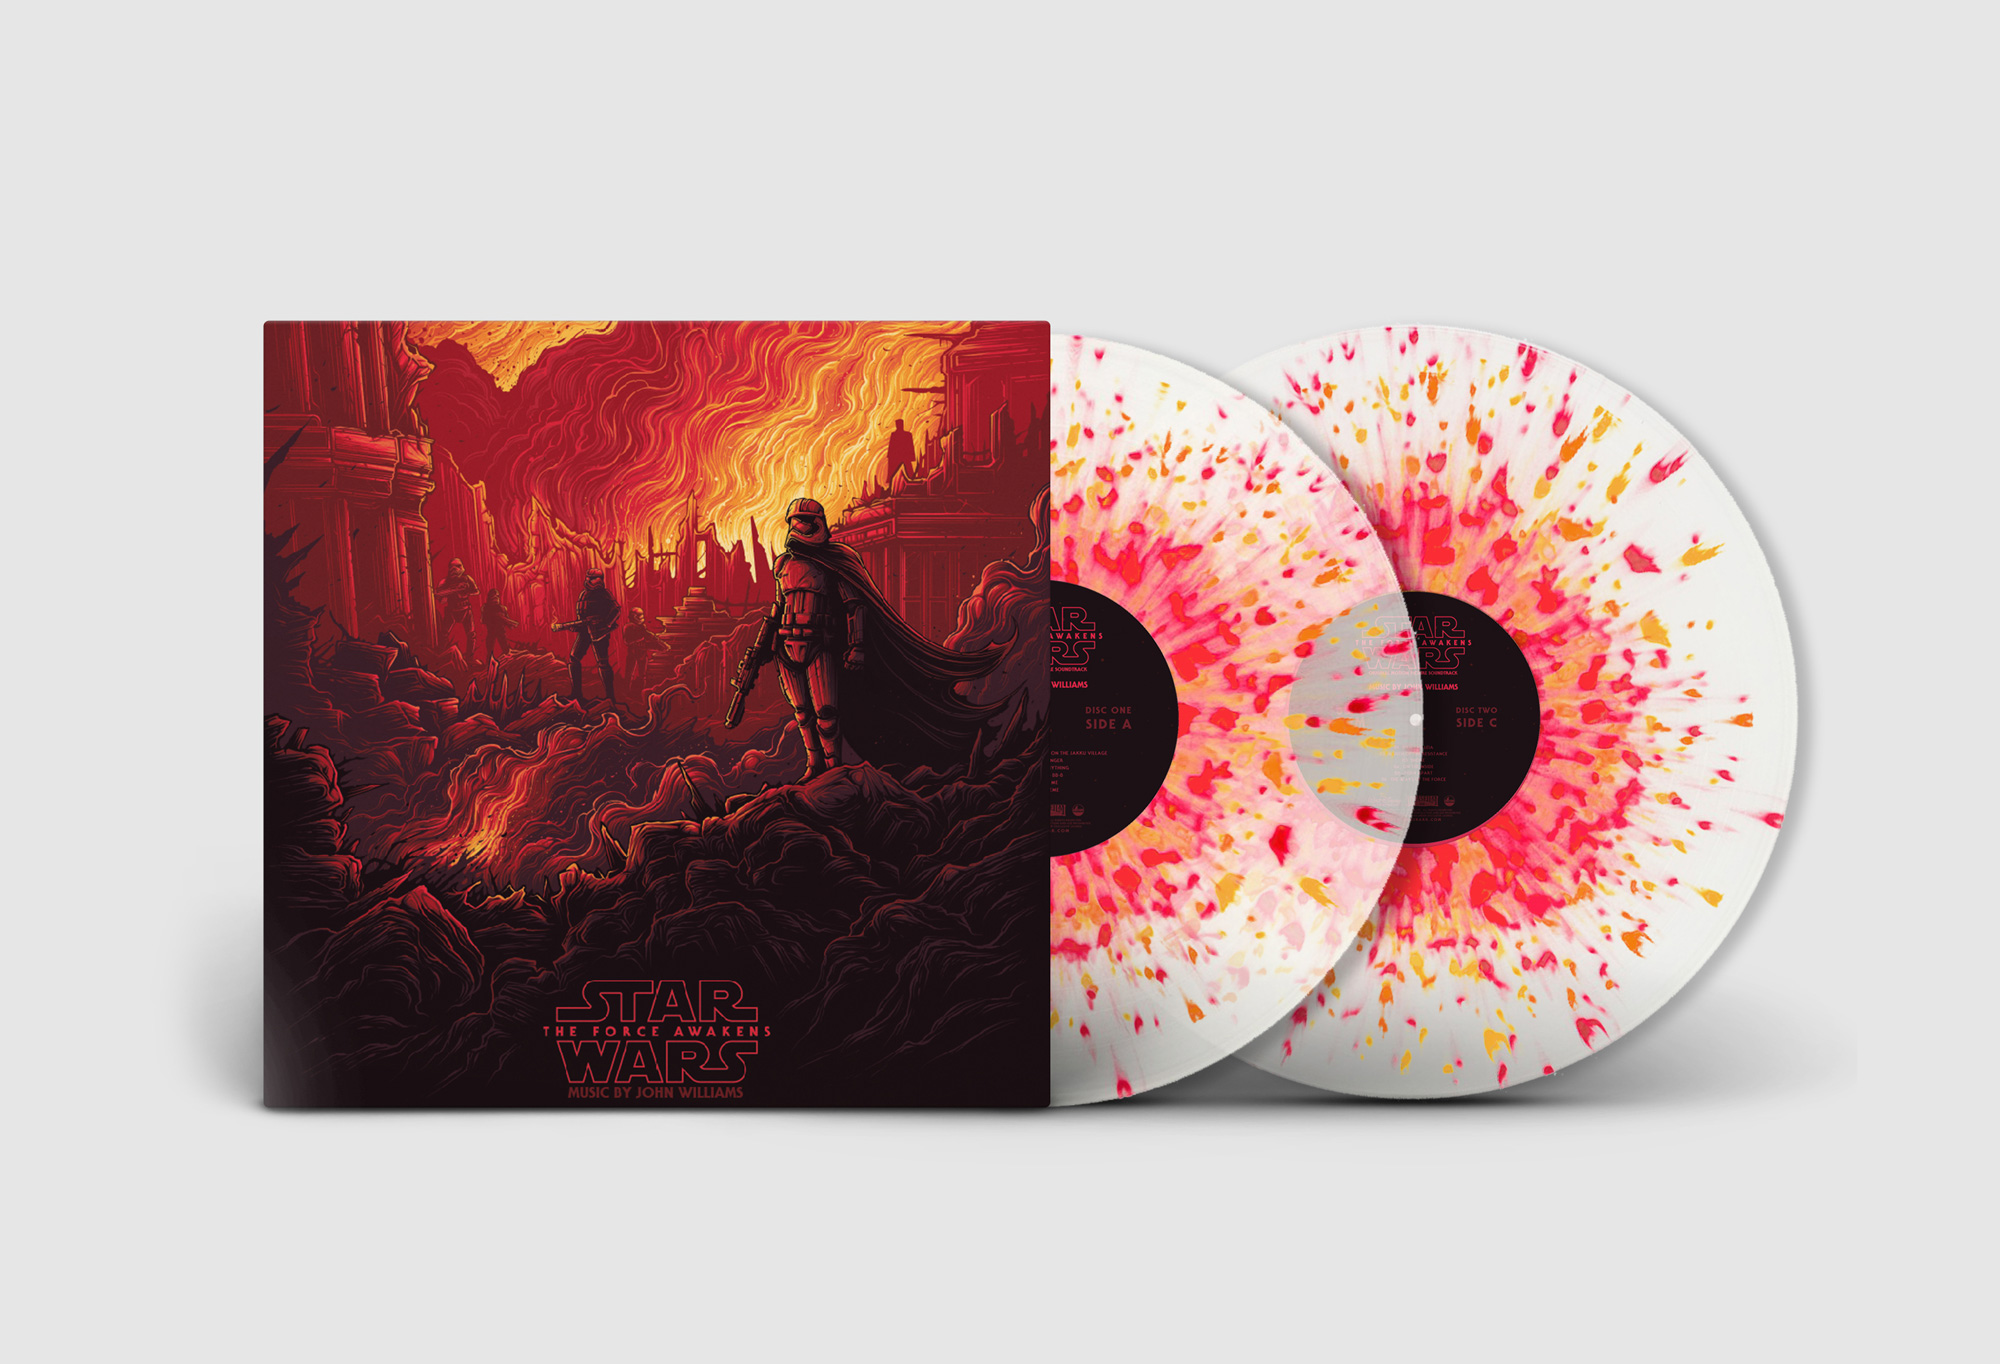 I Am Shark Re-Releases Force Awakens Soundtrack On Beautiful Pressed Vinyl